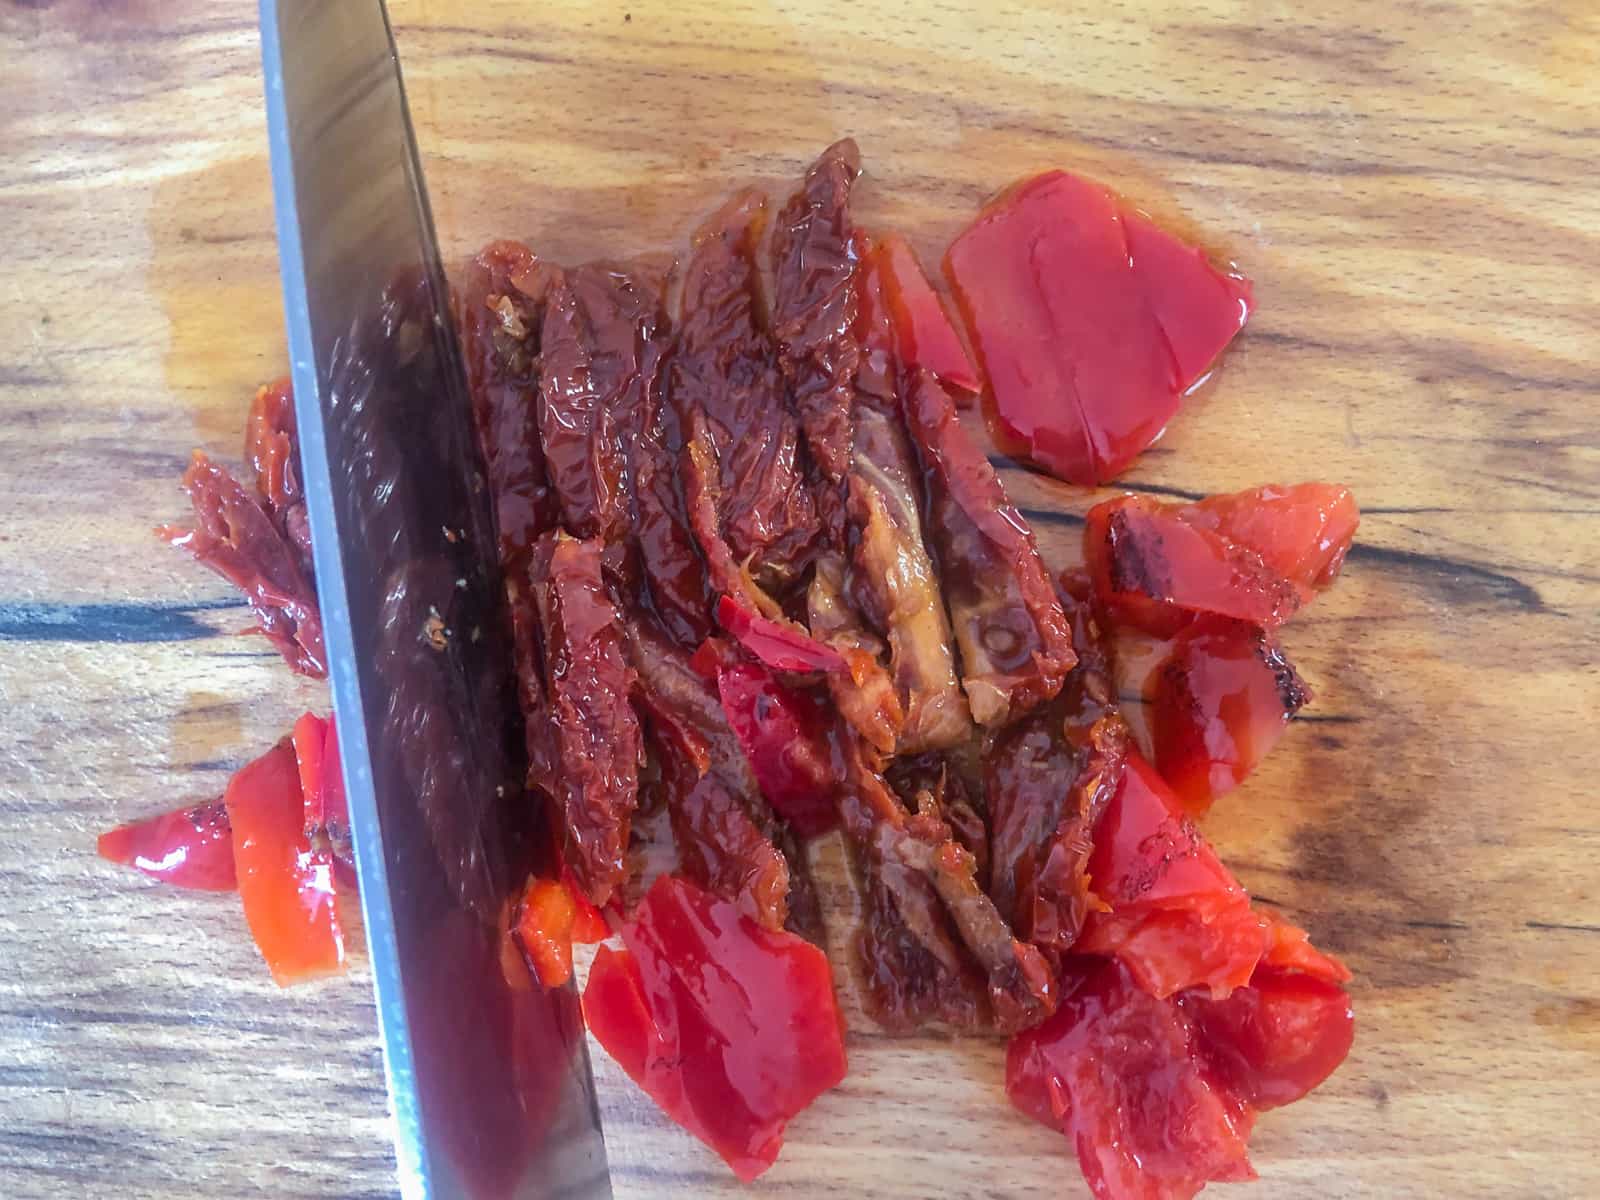 Chopping roasted red peppers and sun-dried tomatoes from a jar into bite sized pieces on a wooden board.